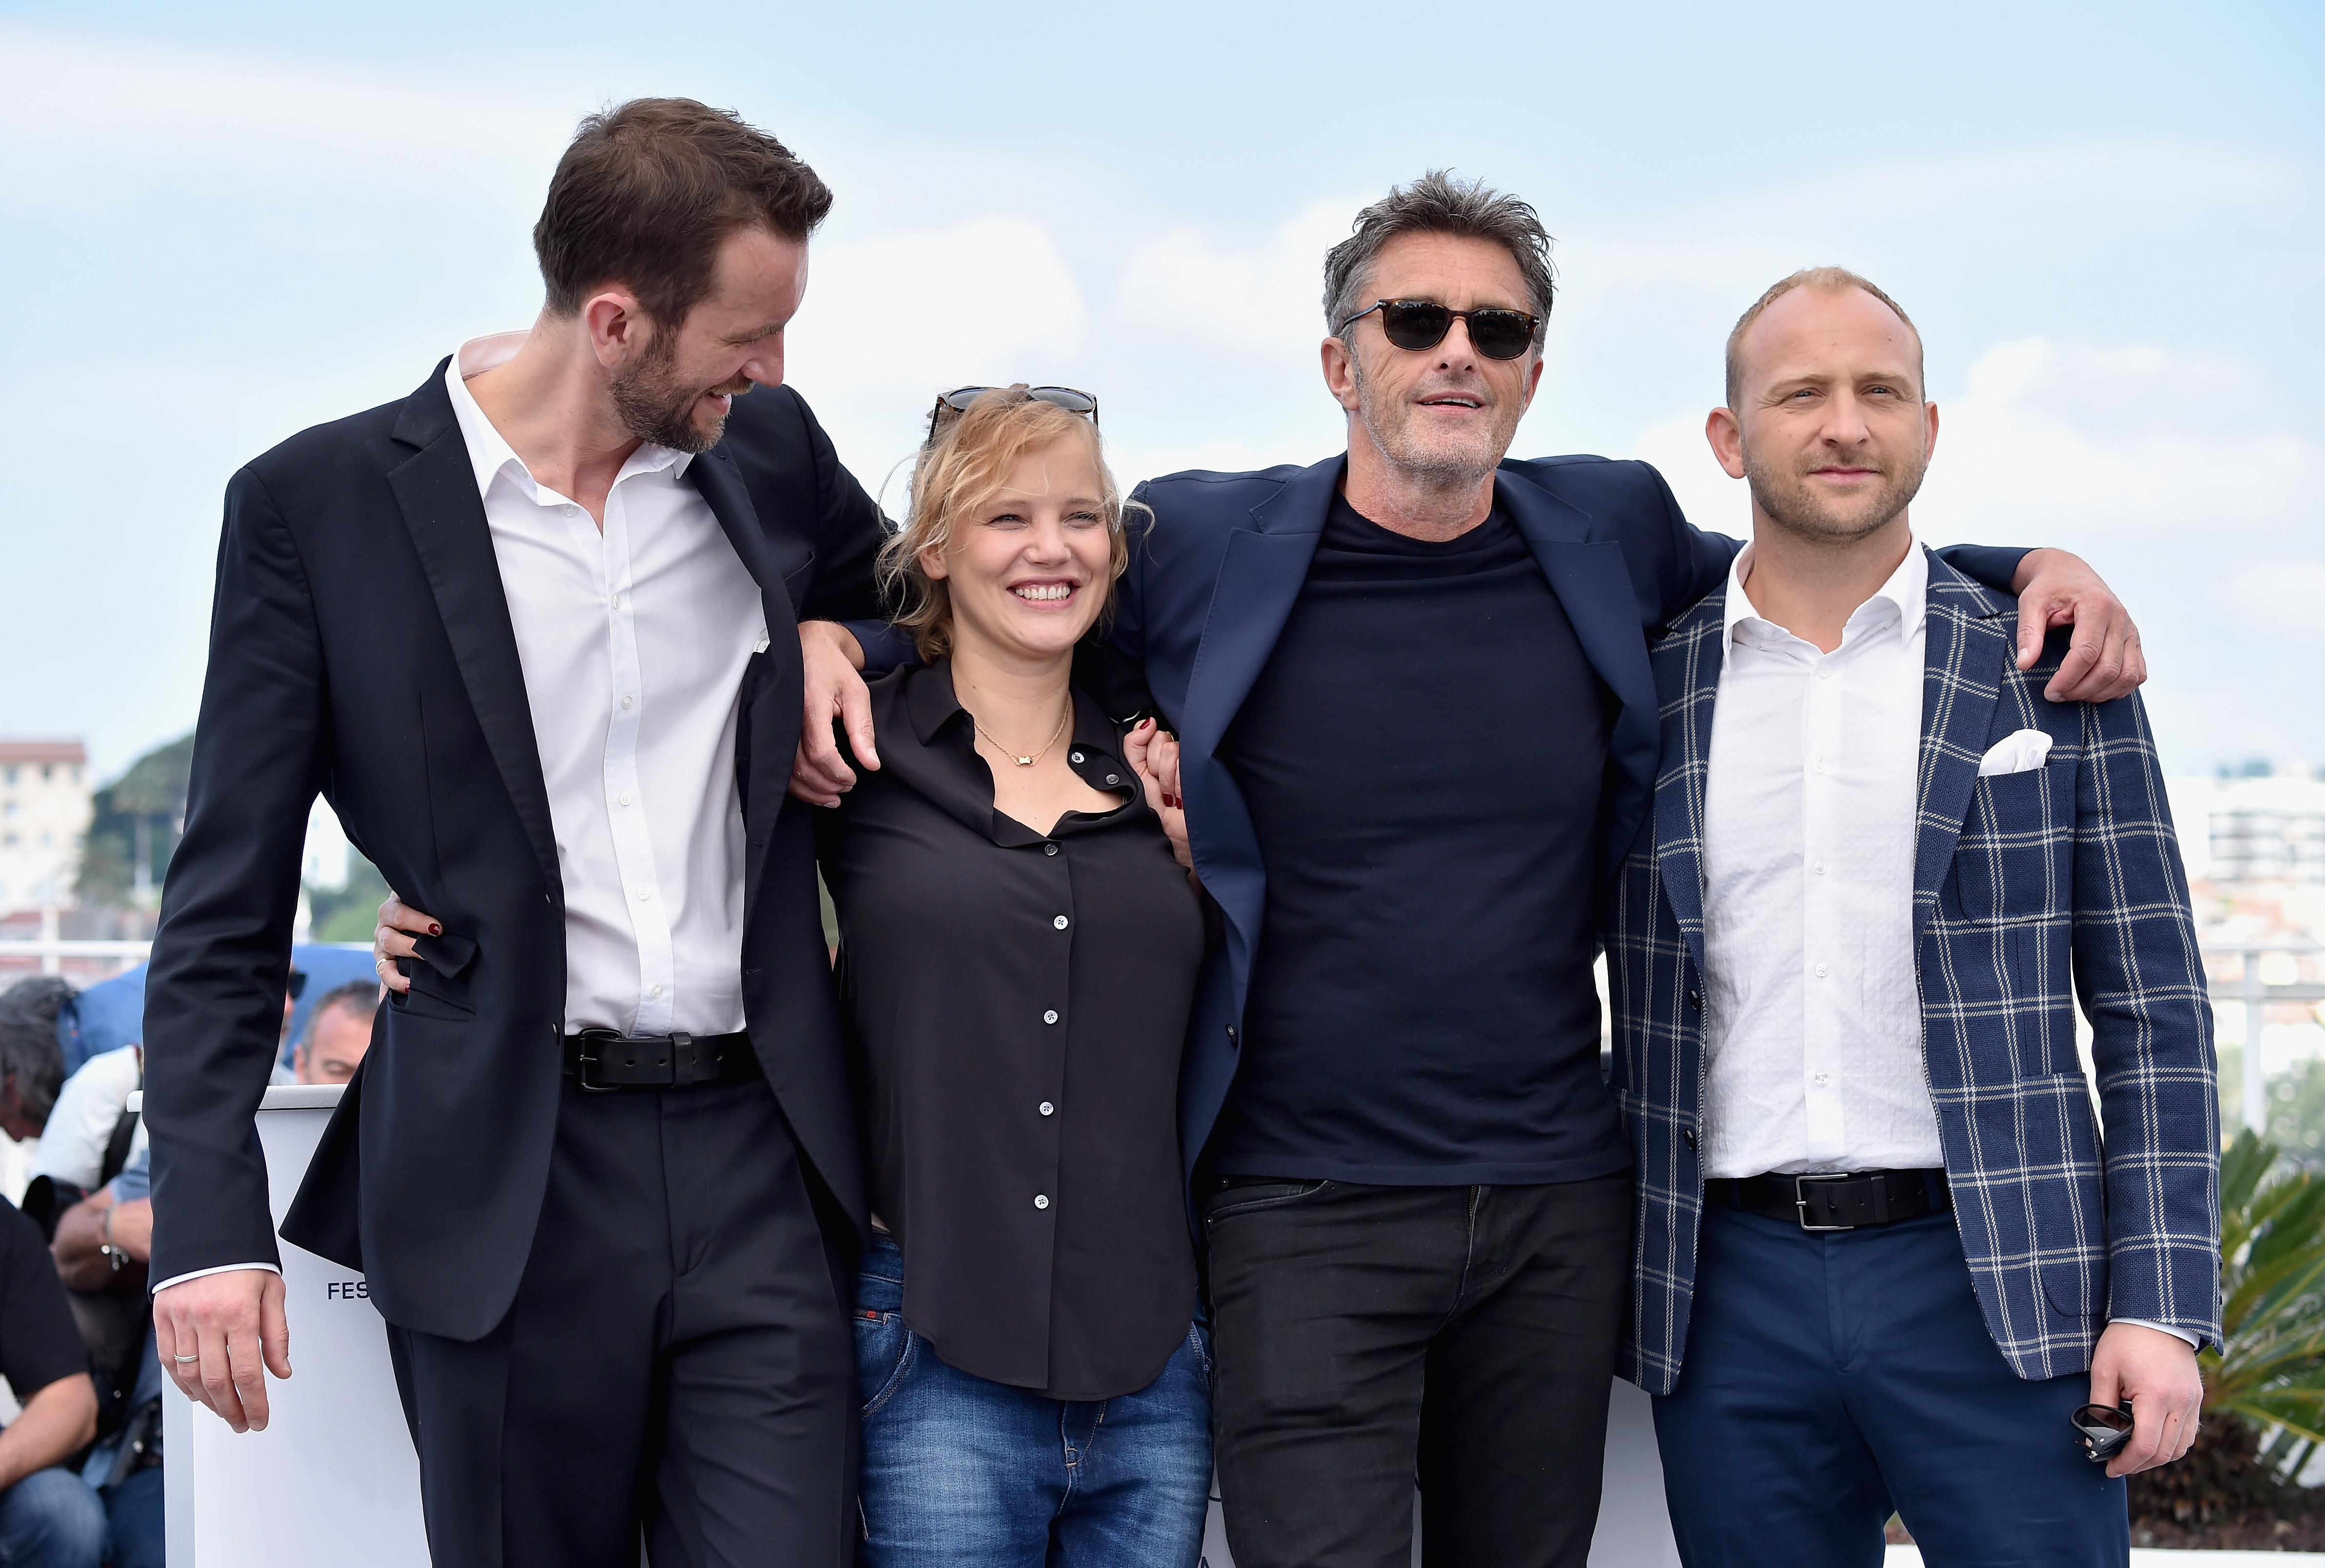 Actor Tomasz Kot, actress Joanna Kulig, director Pawel Pawlikowsk and actor Borys Szyc at the 71st annual Cannes Film Festival on May 11, 2018 in Cannes, France. (Dominique Charriau&mdash;WireImage/Getty Images)